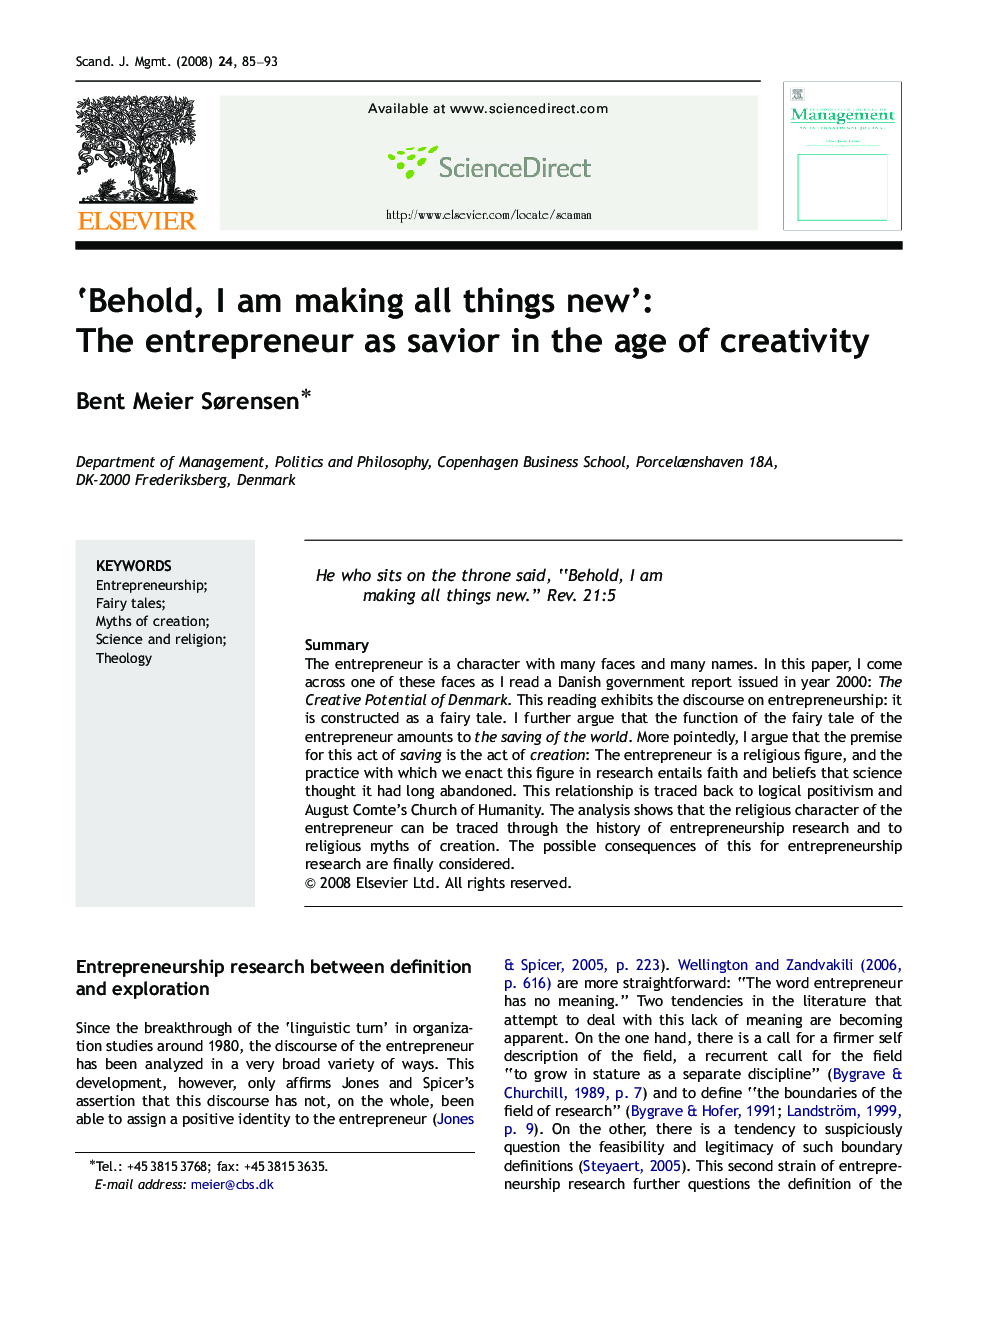 ‘Behold, I am making all things new’: The entrepreneur as savior in the age of creativity